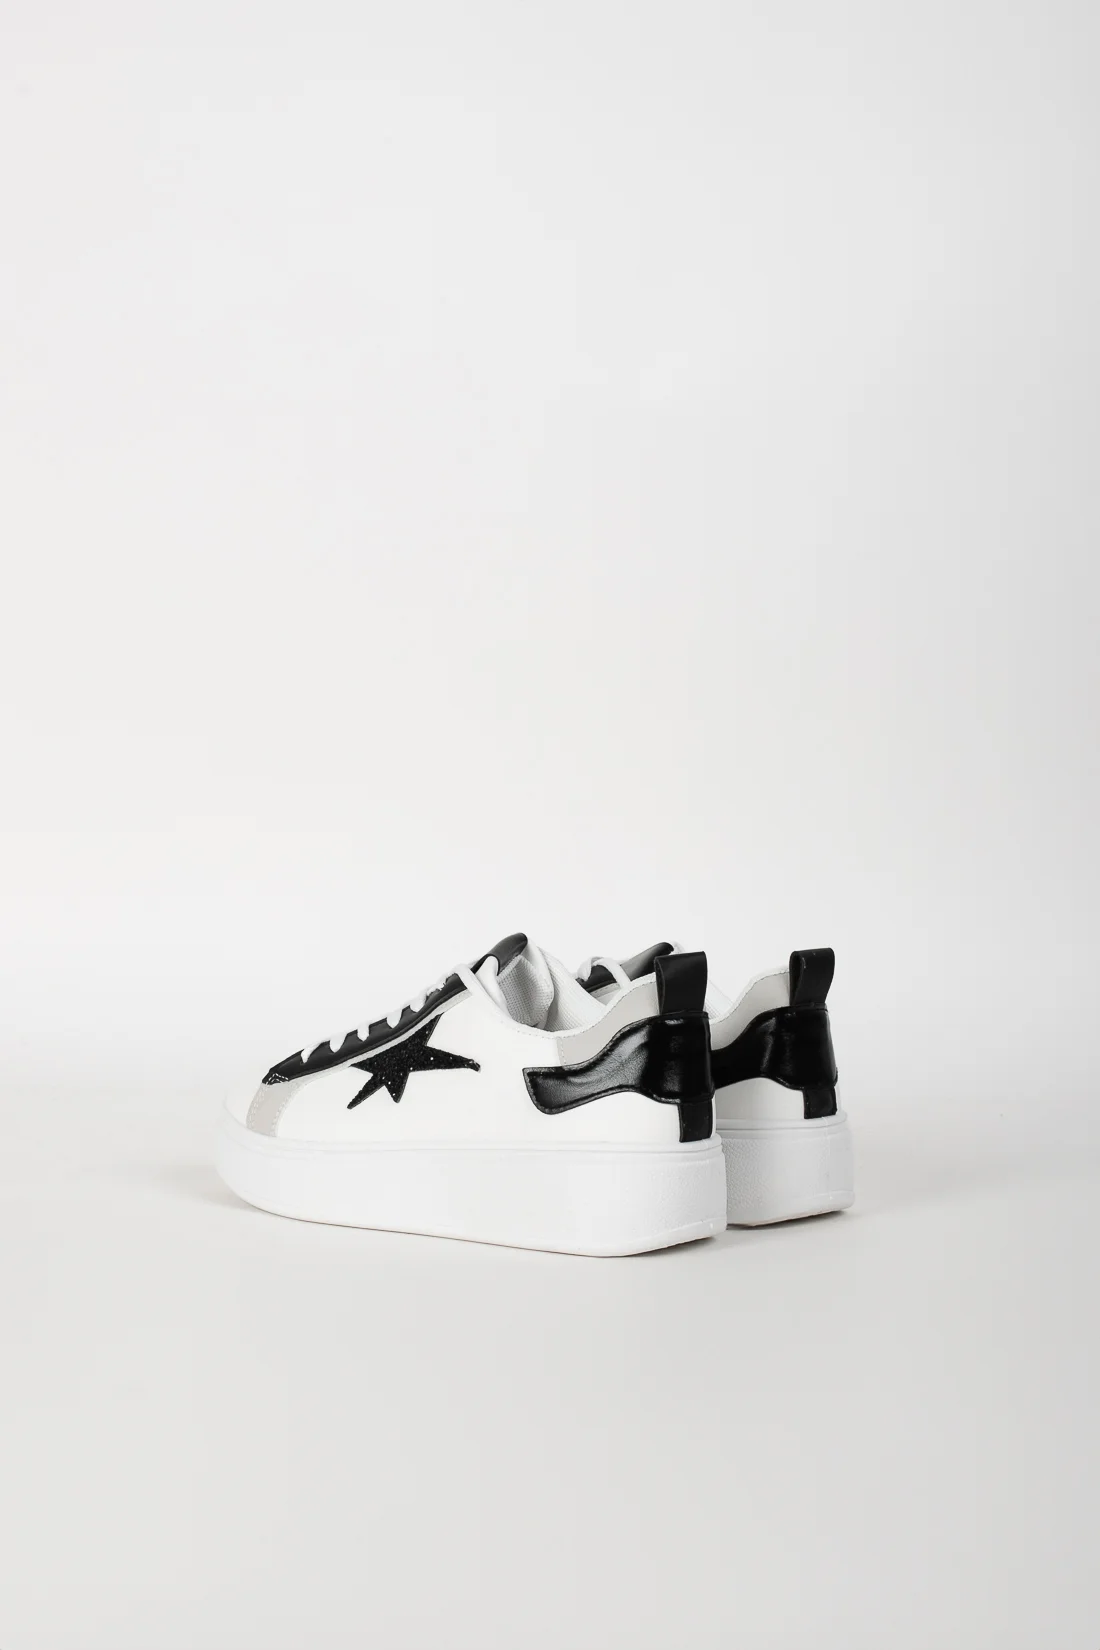 CASUAL SNEAKERS FOR MEN - WHITE/BLACK